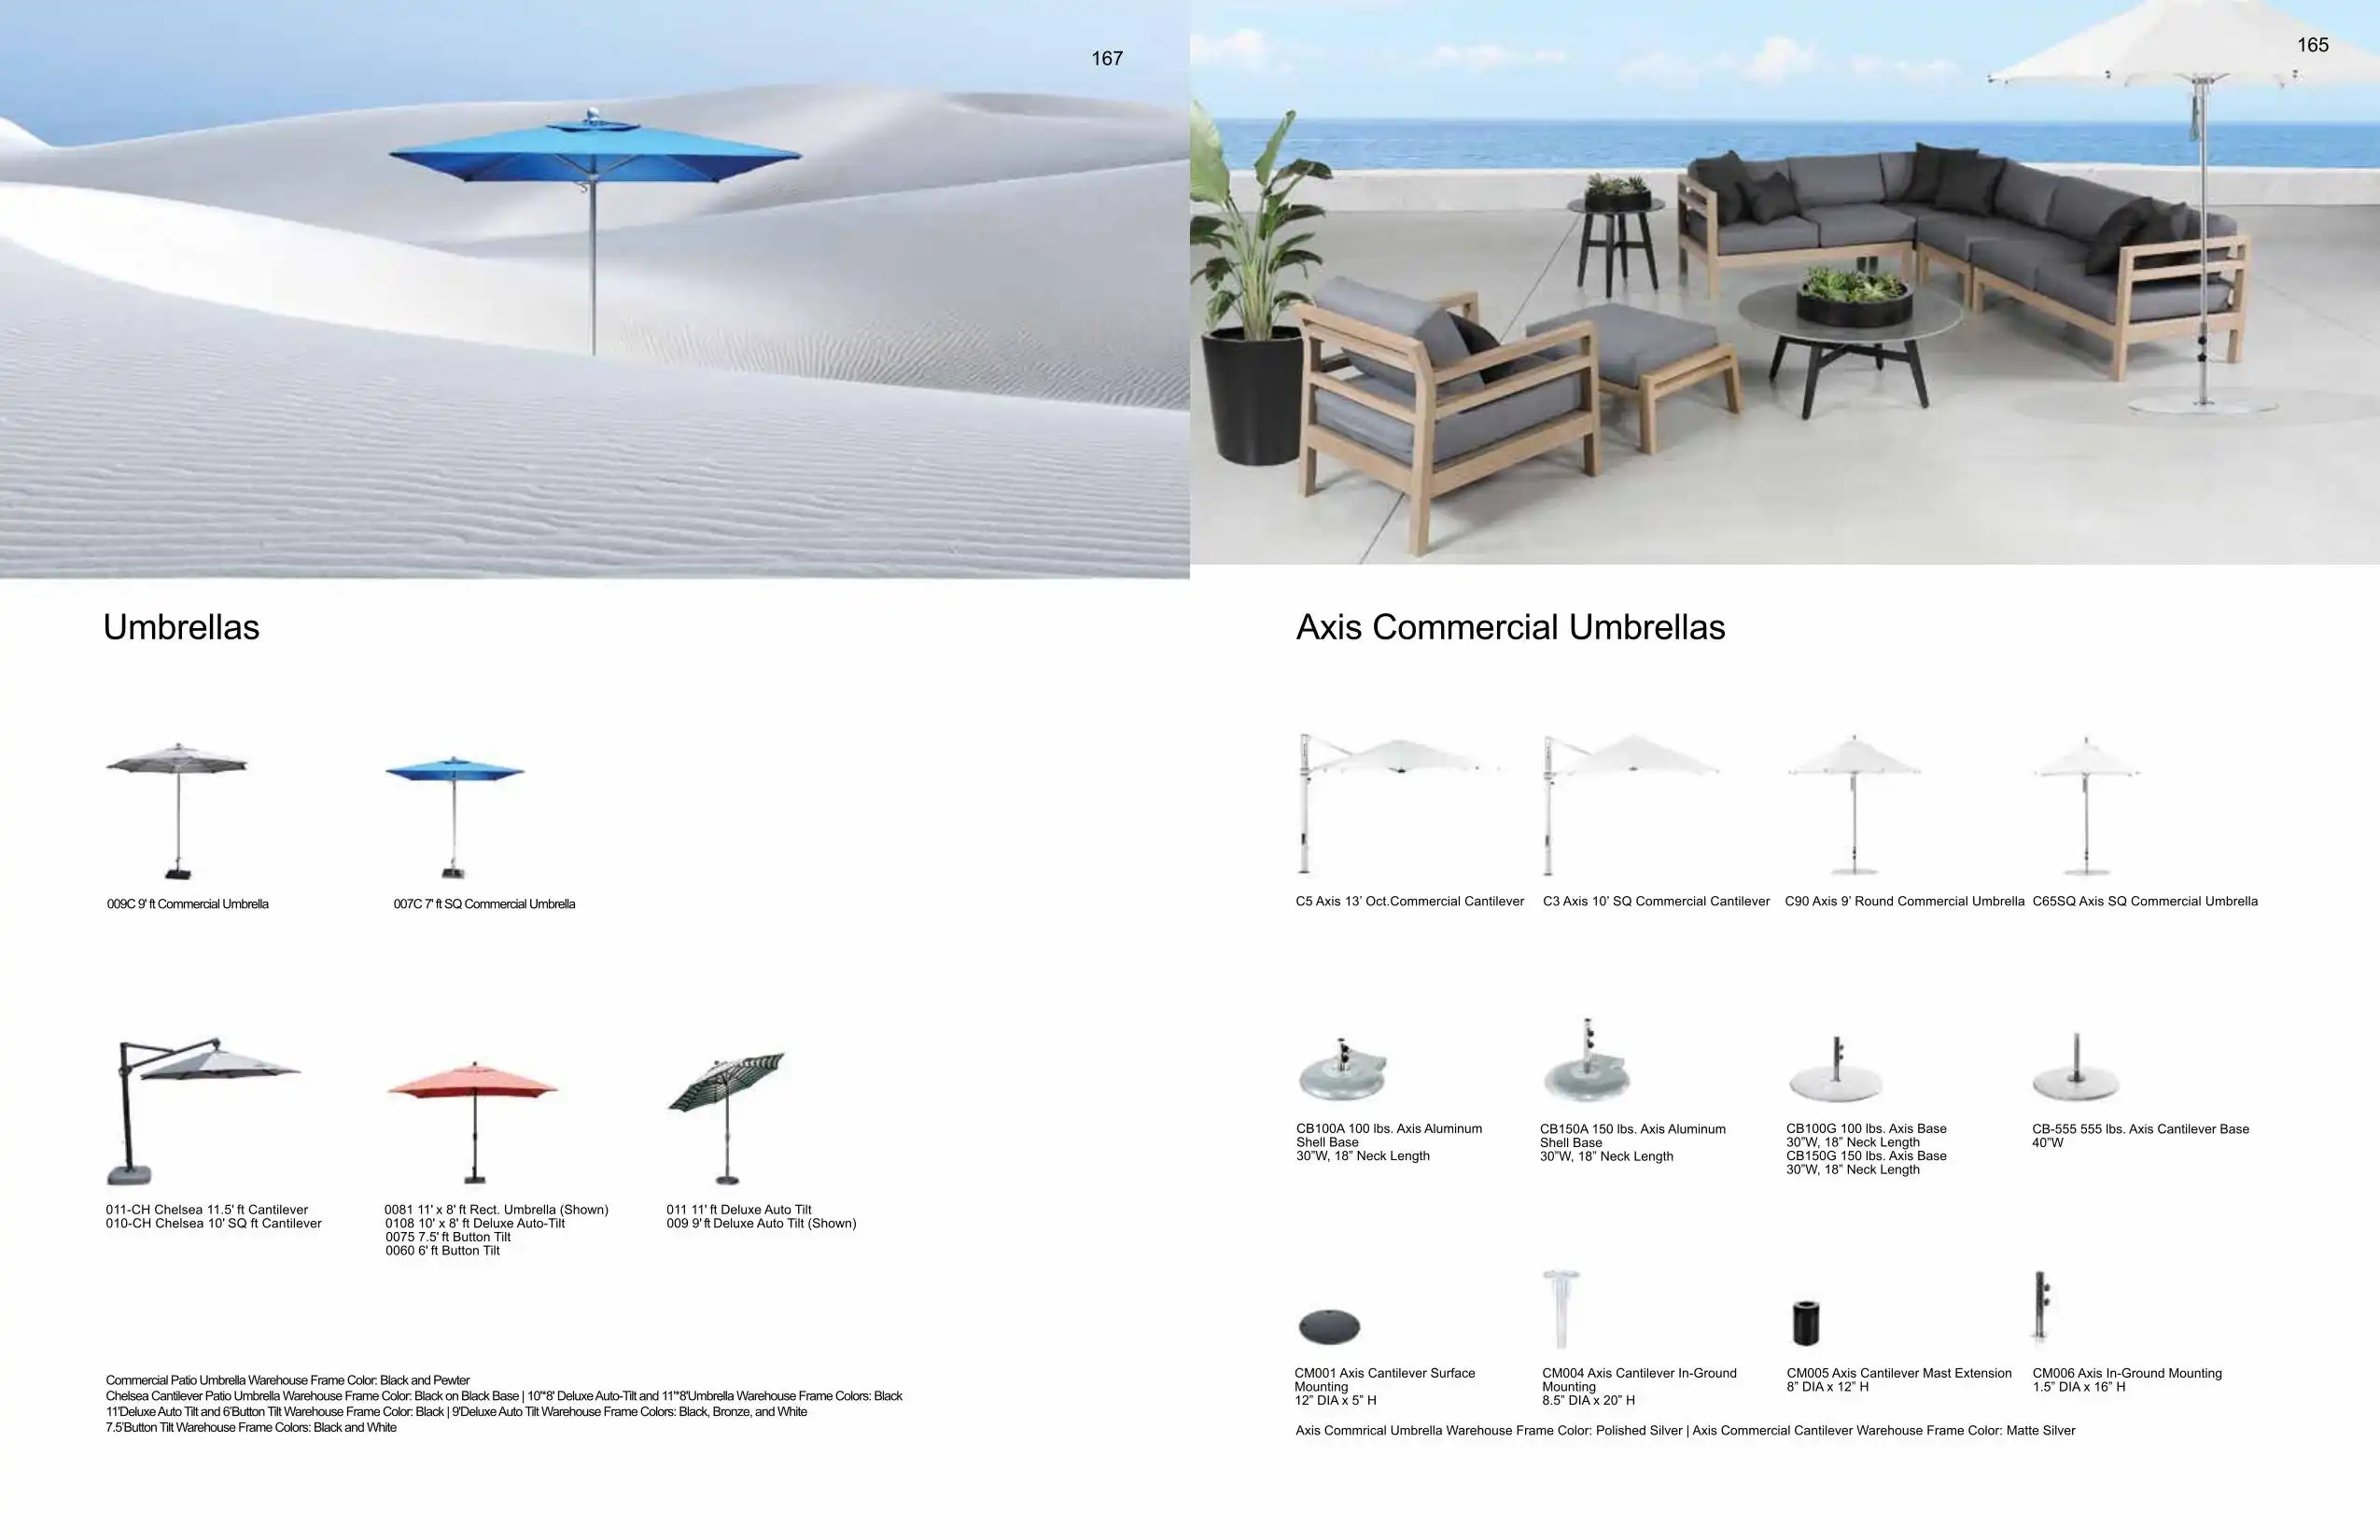 CHELSEA Residential & AXIS Commercial Umbrella Collection(s) by Cabana Coast 